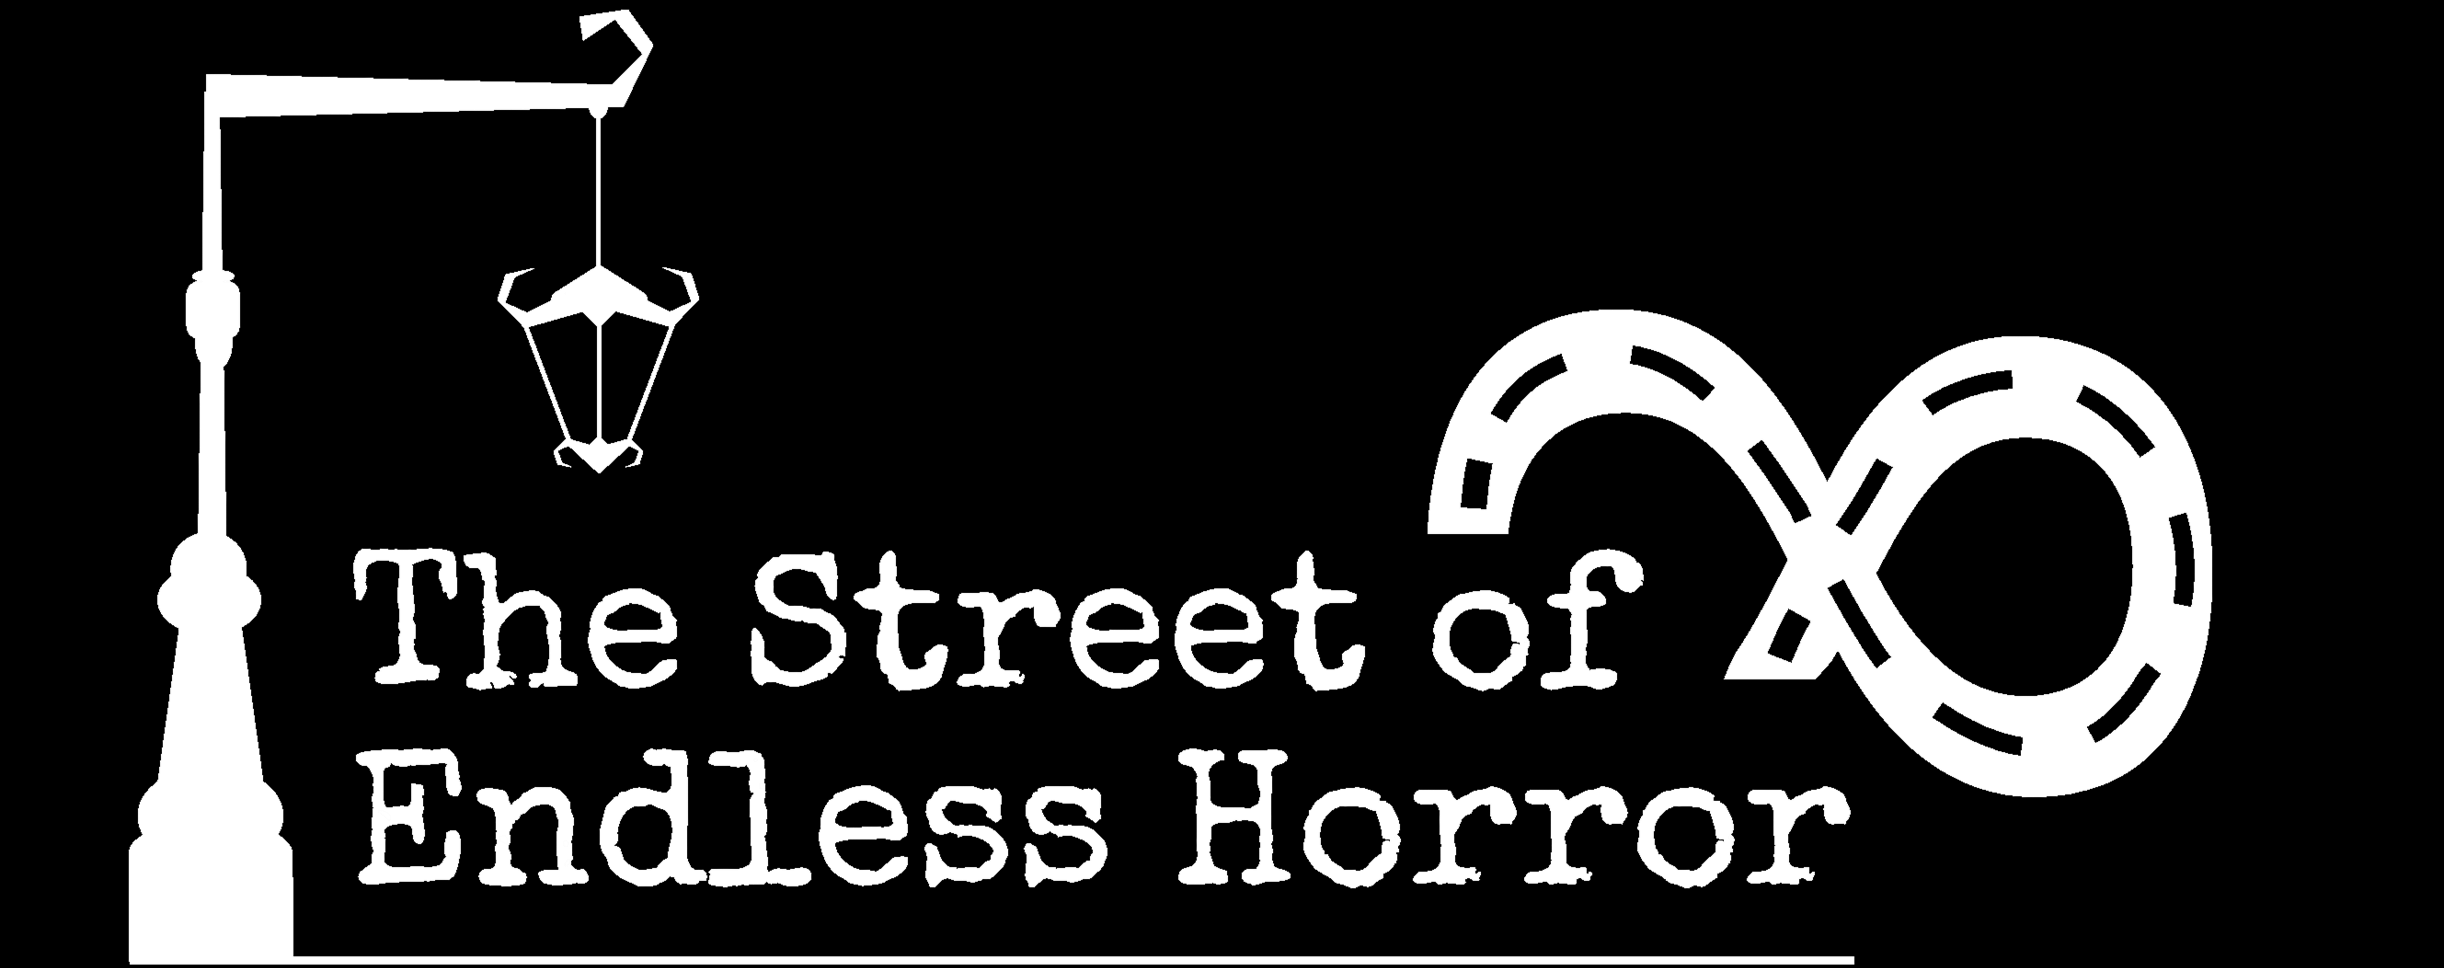 The Street of Endless Horror